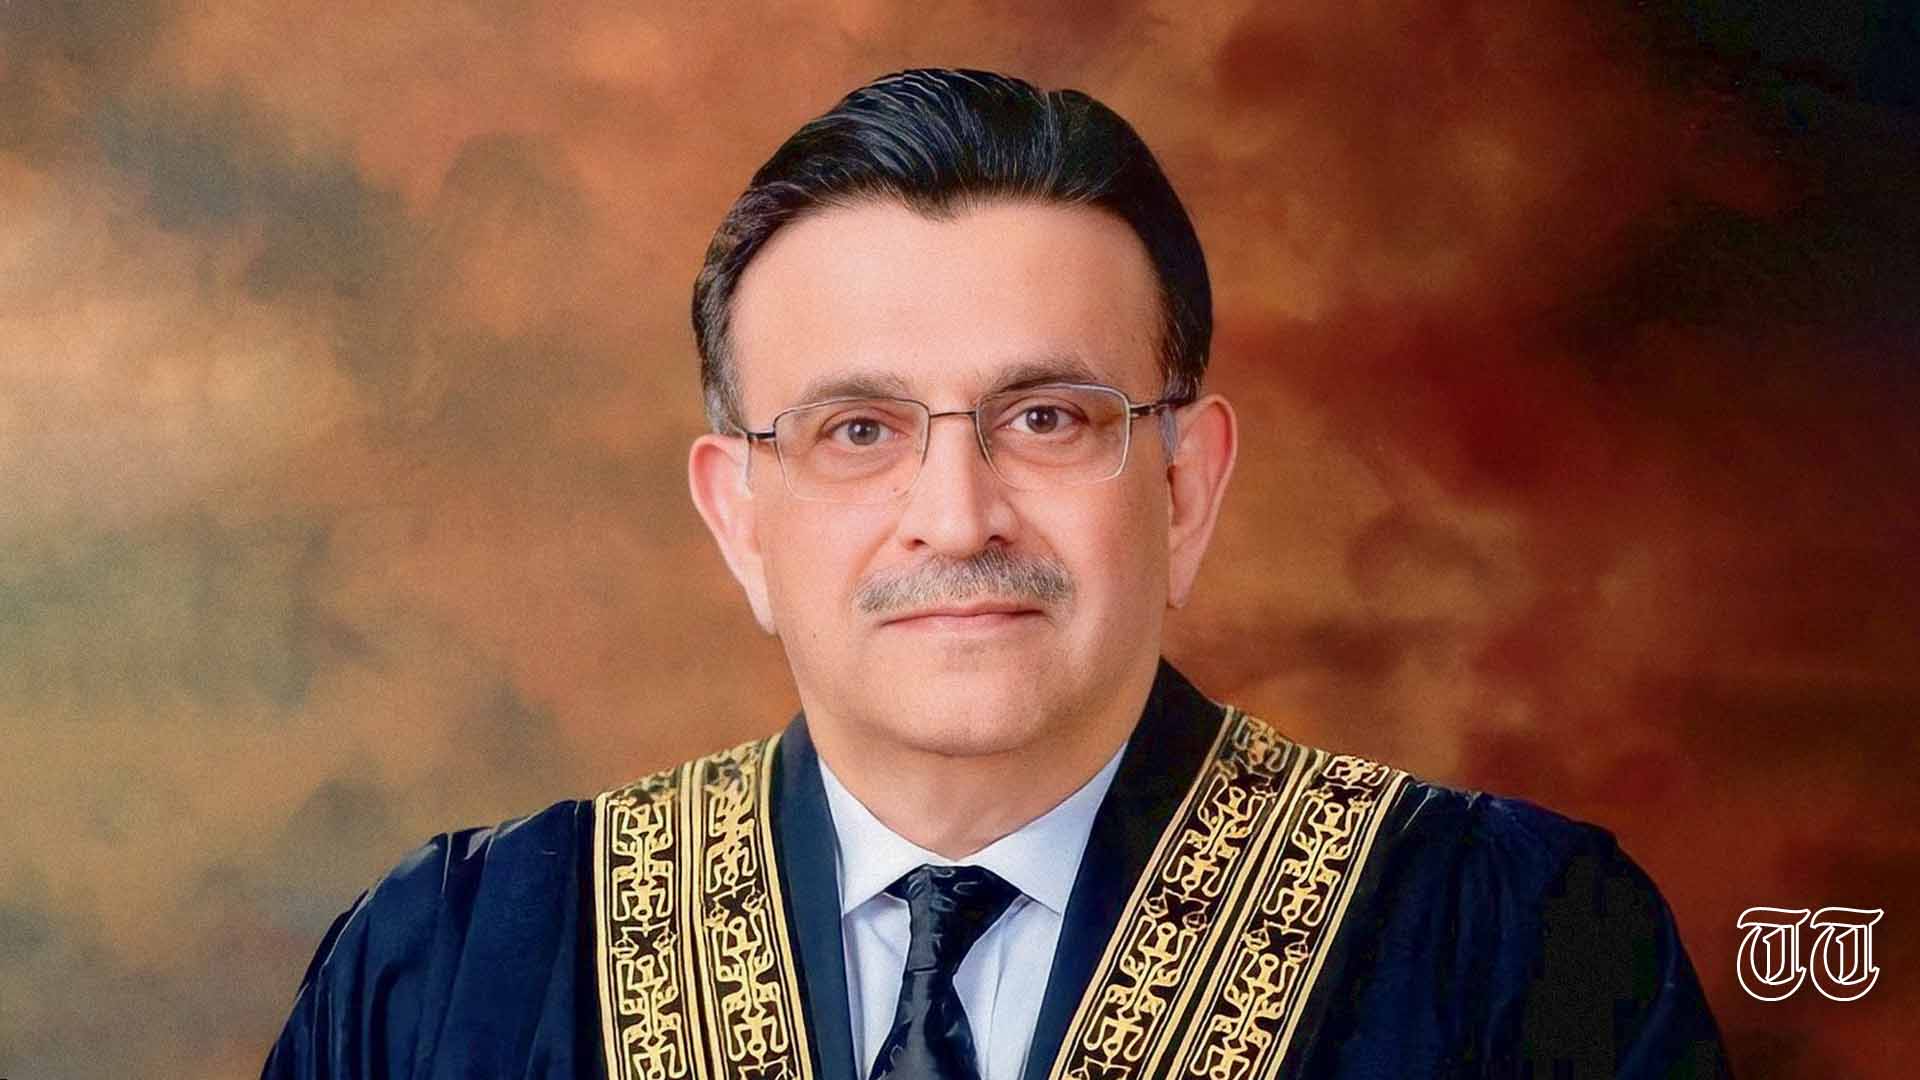 A file photo is shown of Chief Justice of Pakistan Umar Ata Bandial. — FILE/THE THURSDAY TIMES